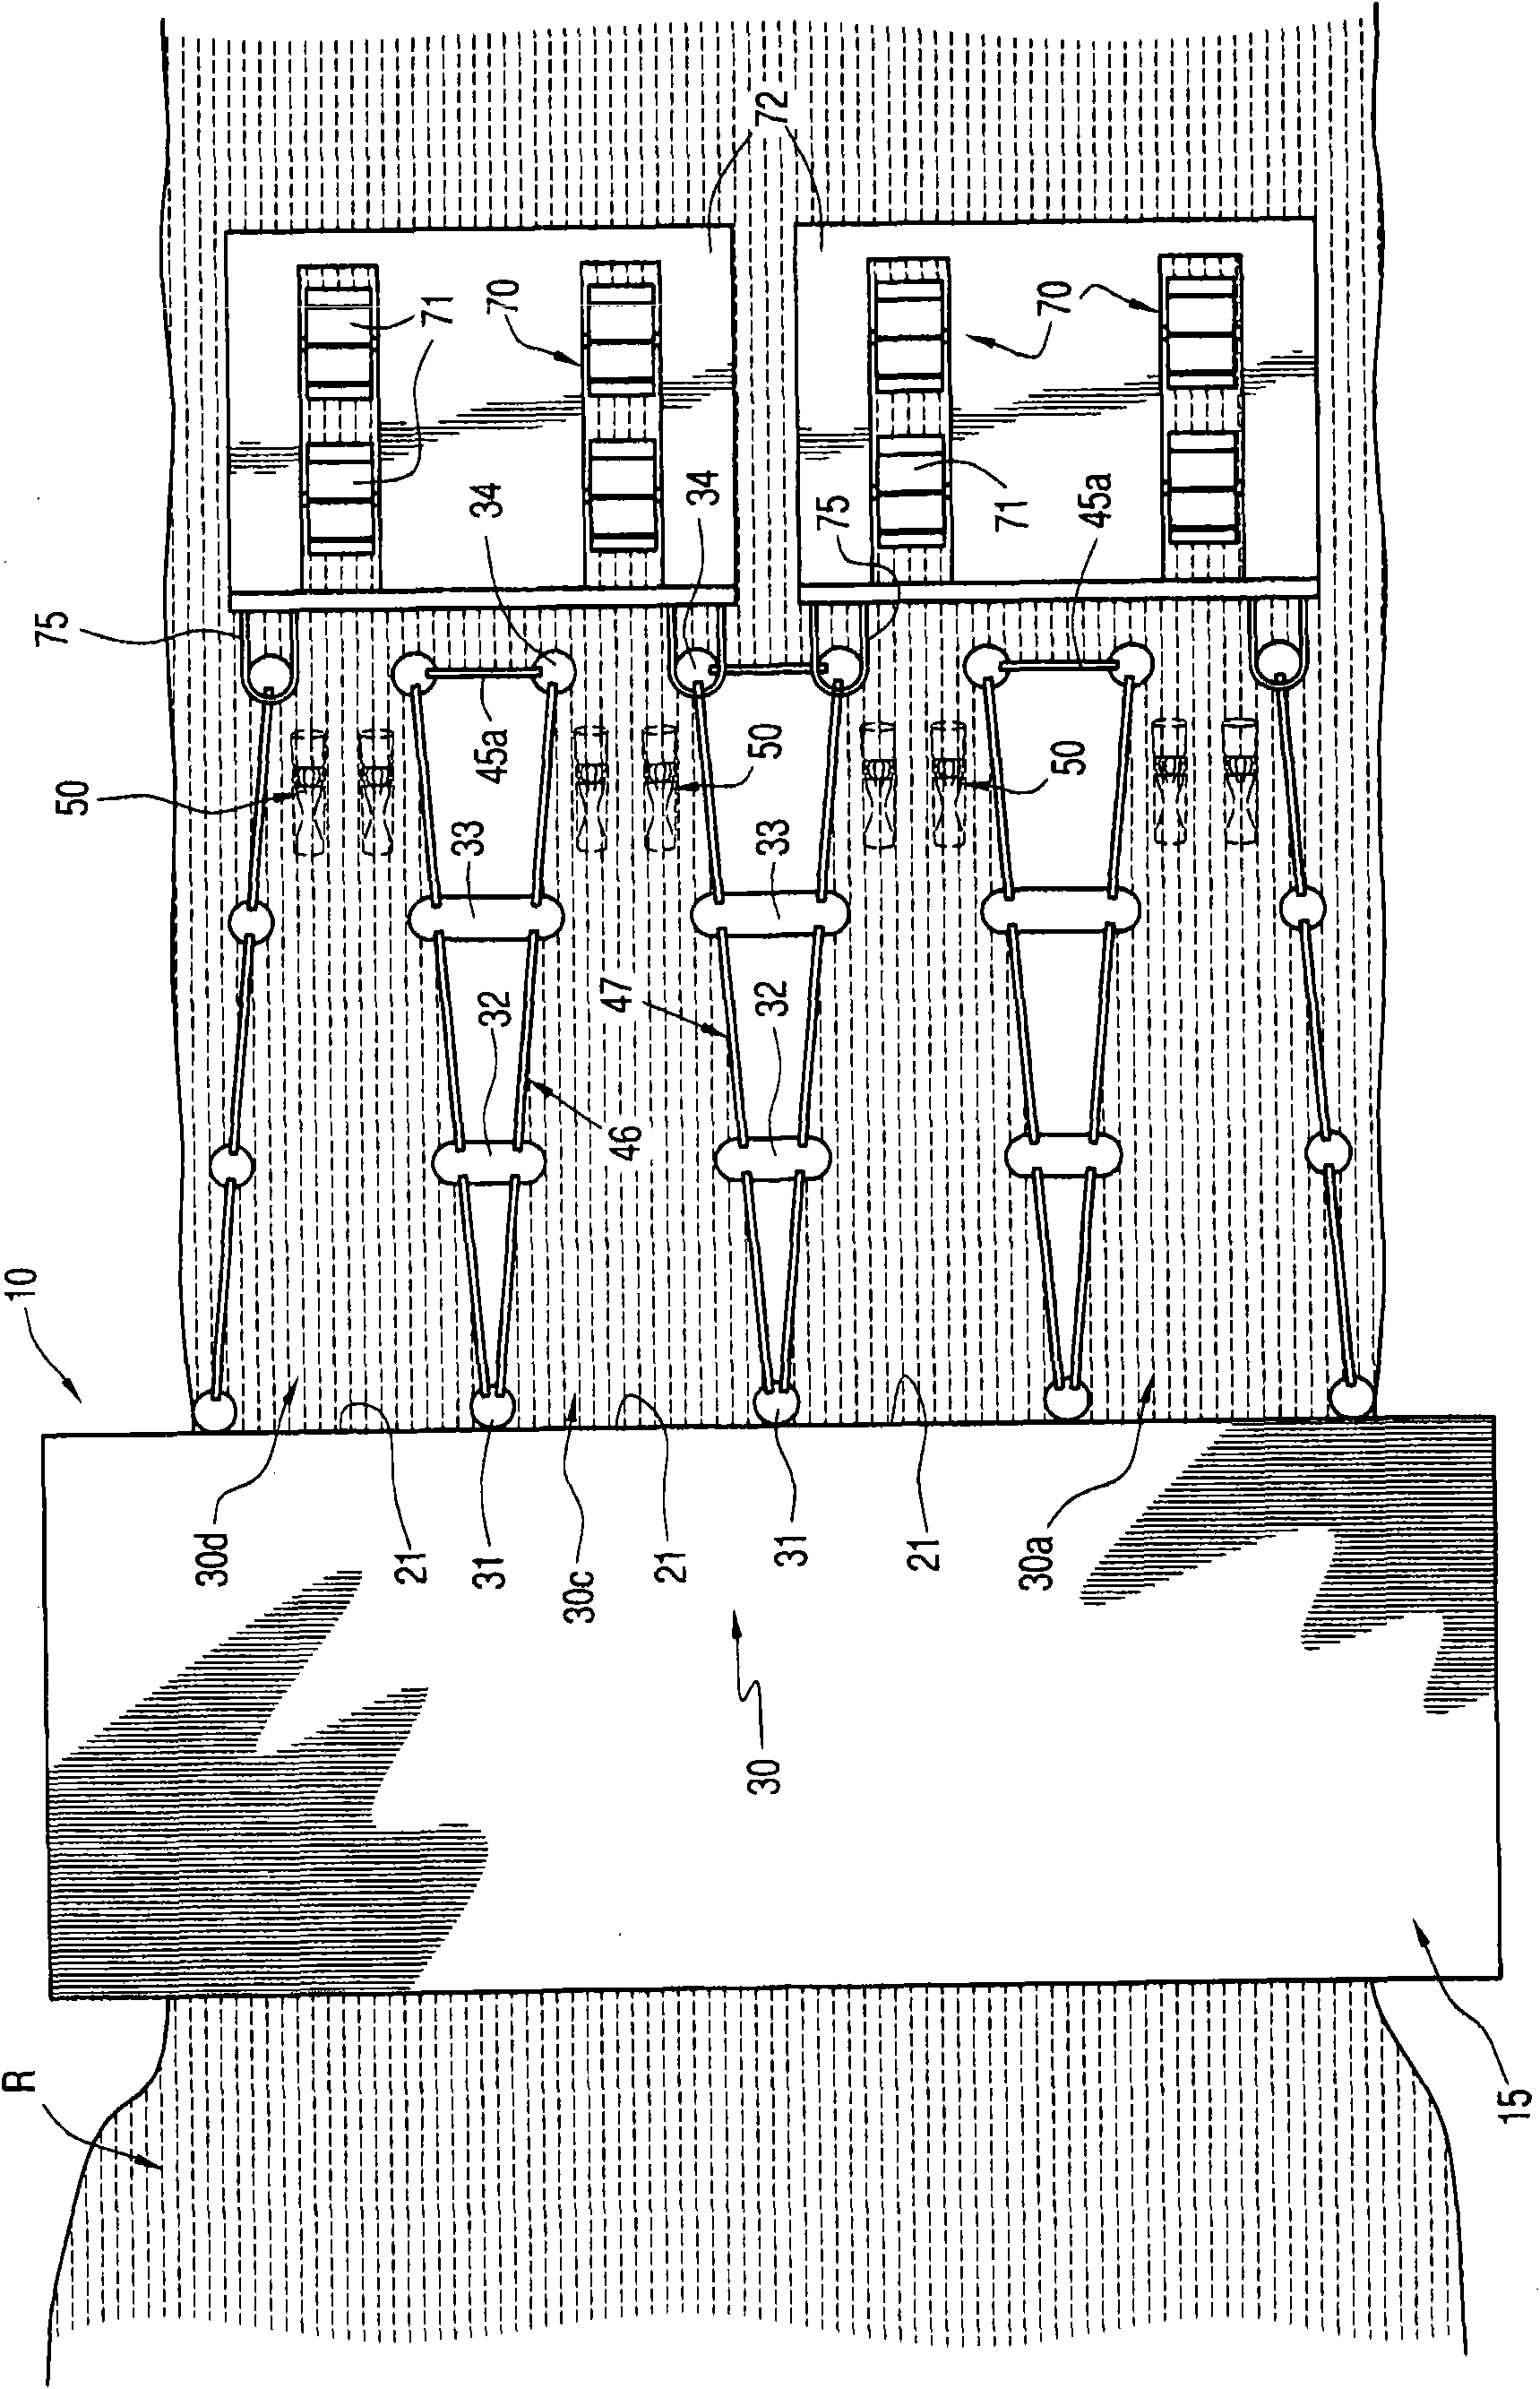 Apparatus for hydroelectric power production expansion